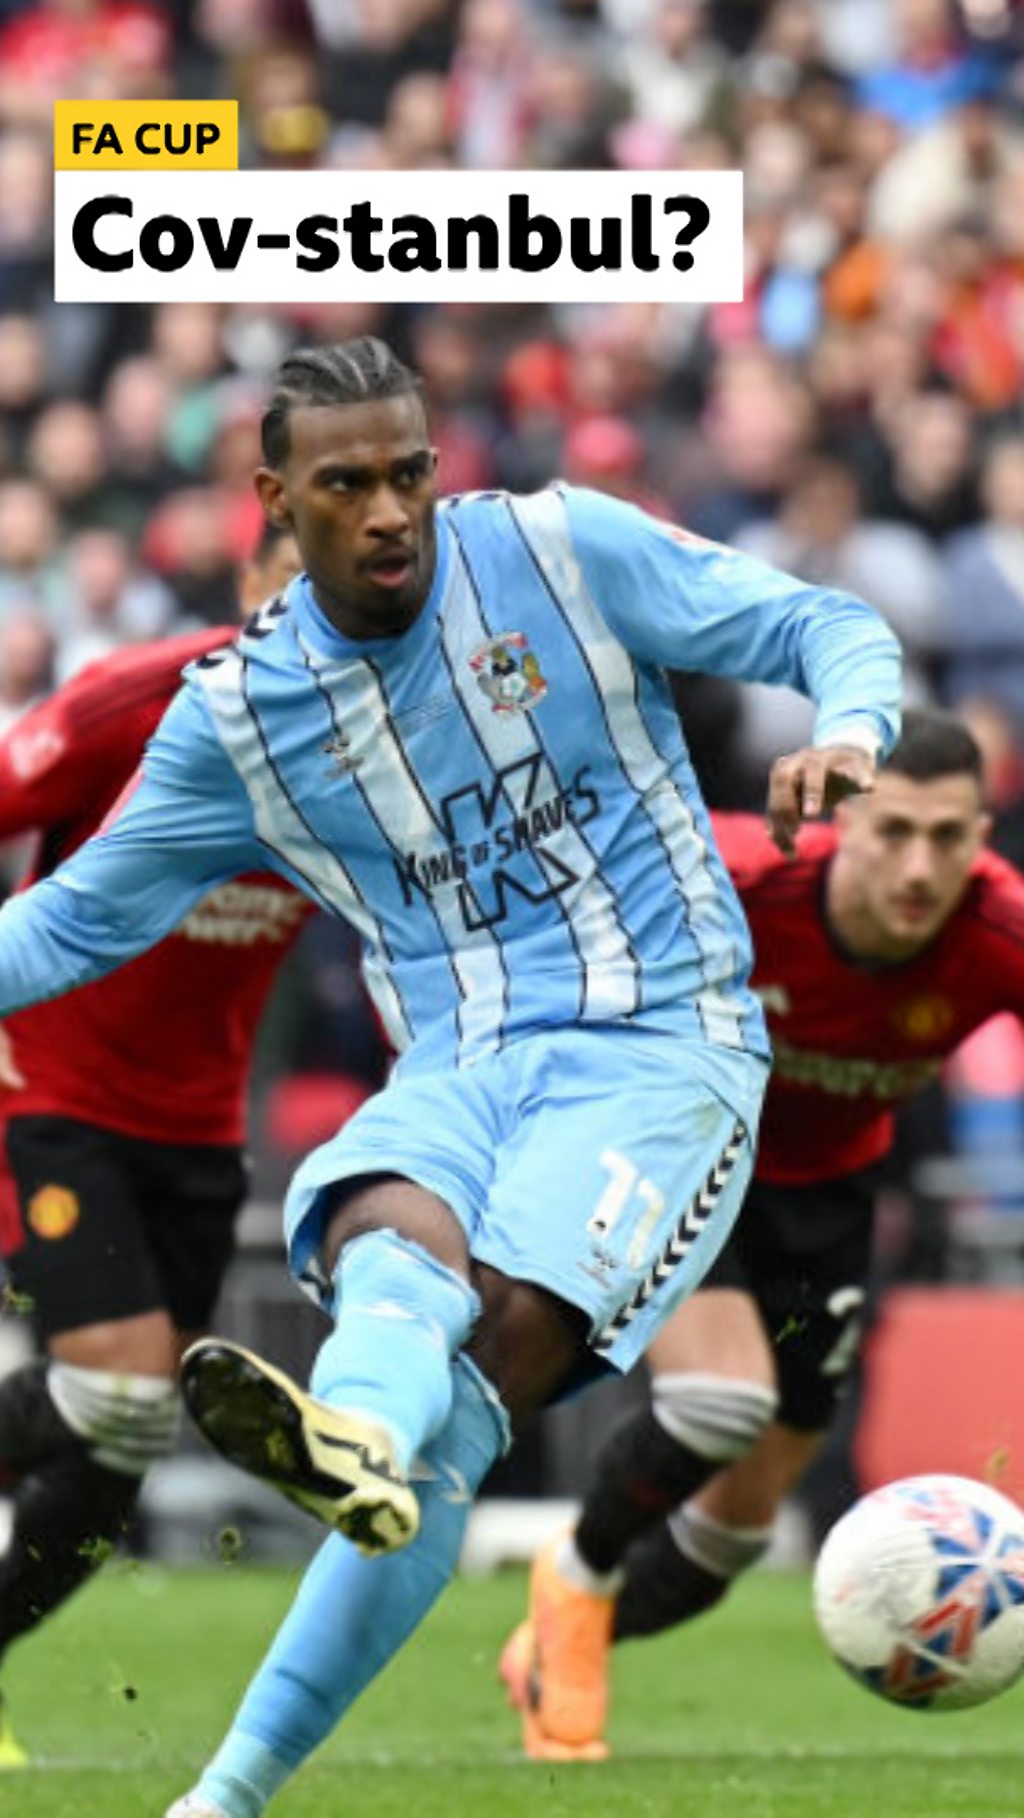 Coventry's Haji Wright scores dramatic late penalty to make it 3-3